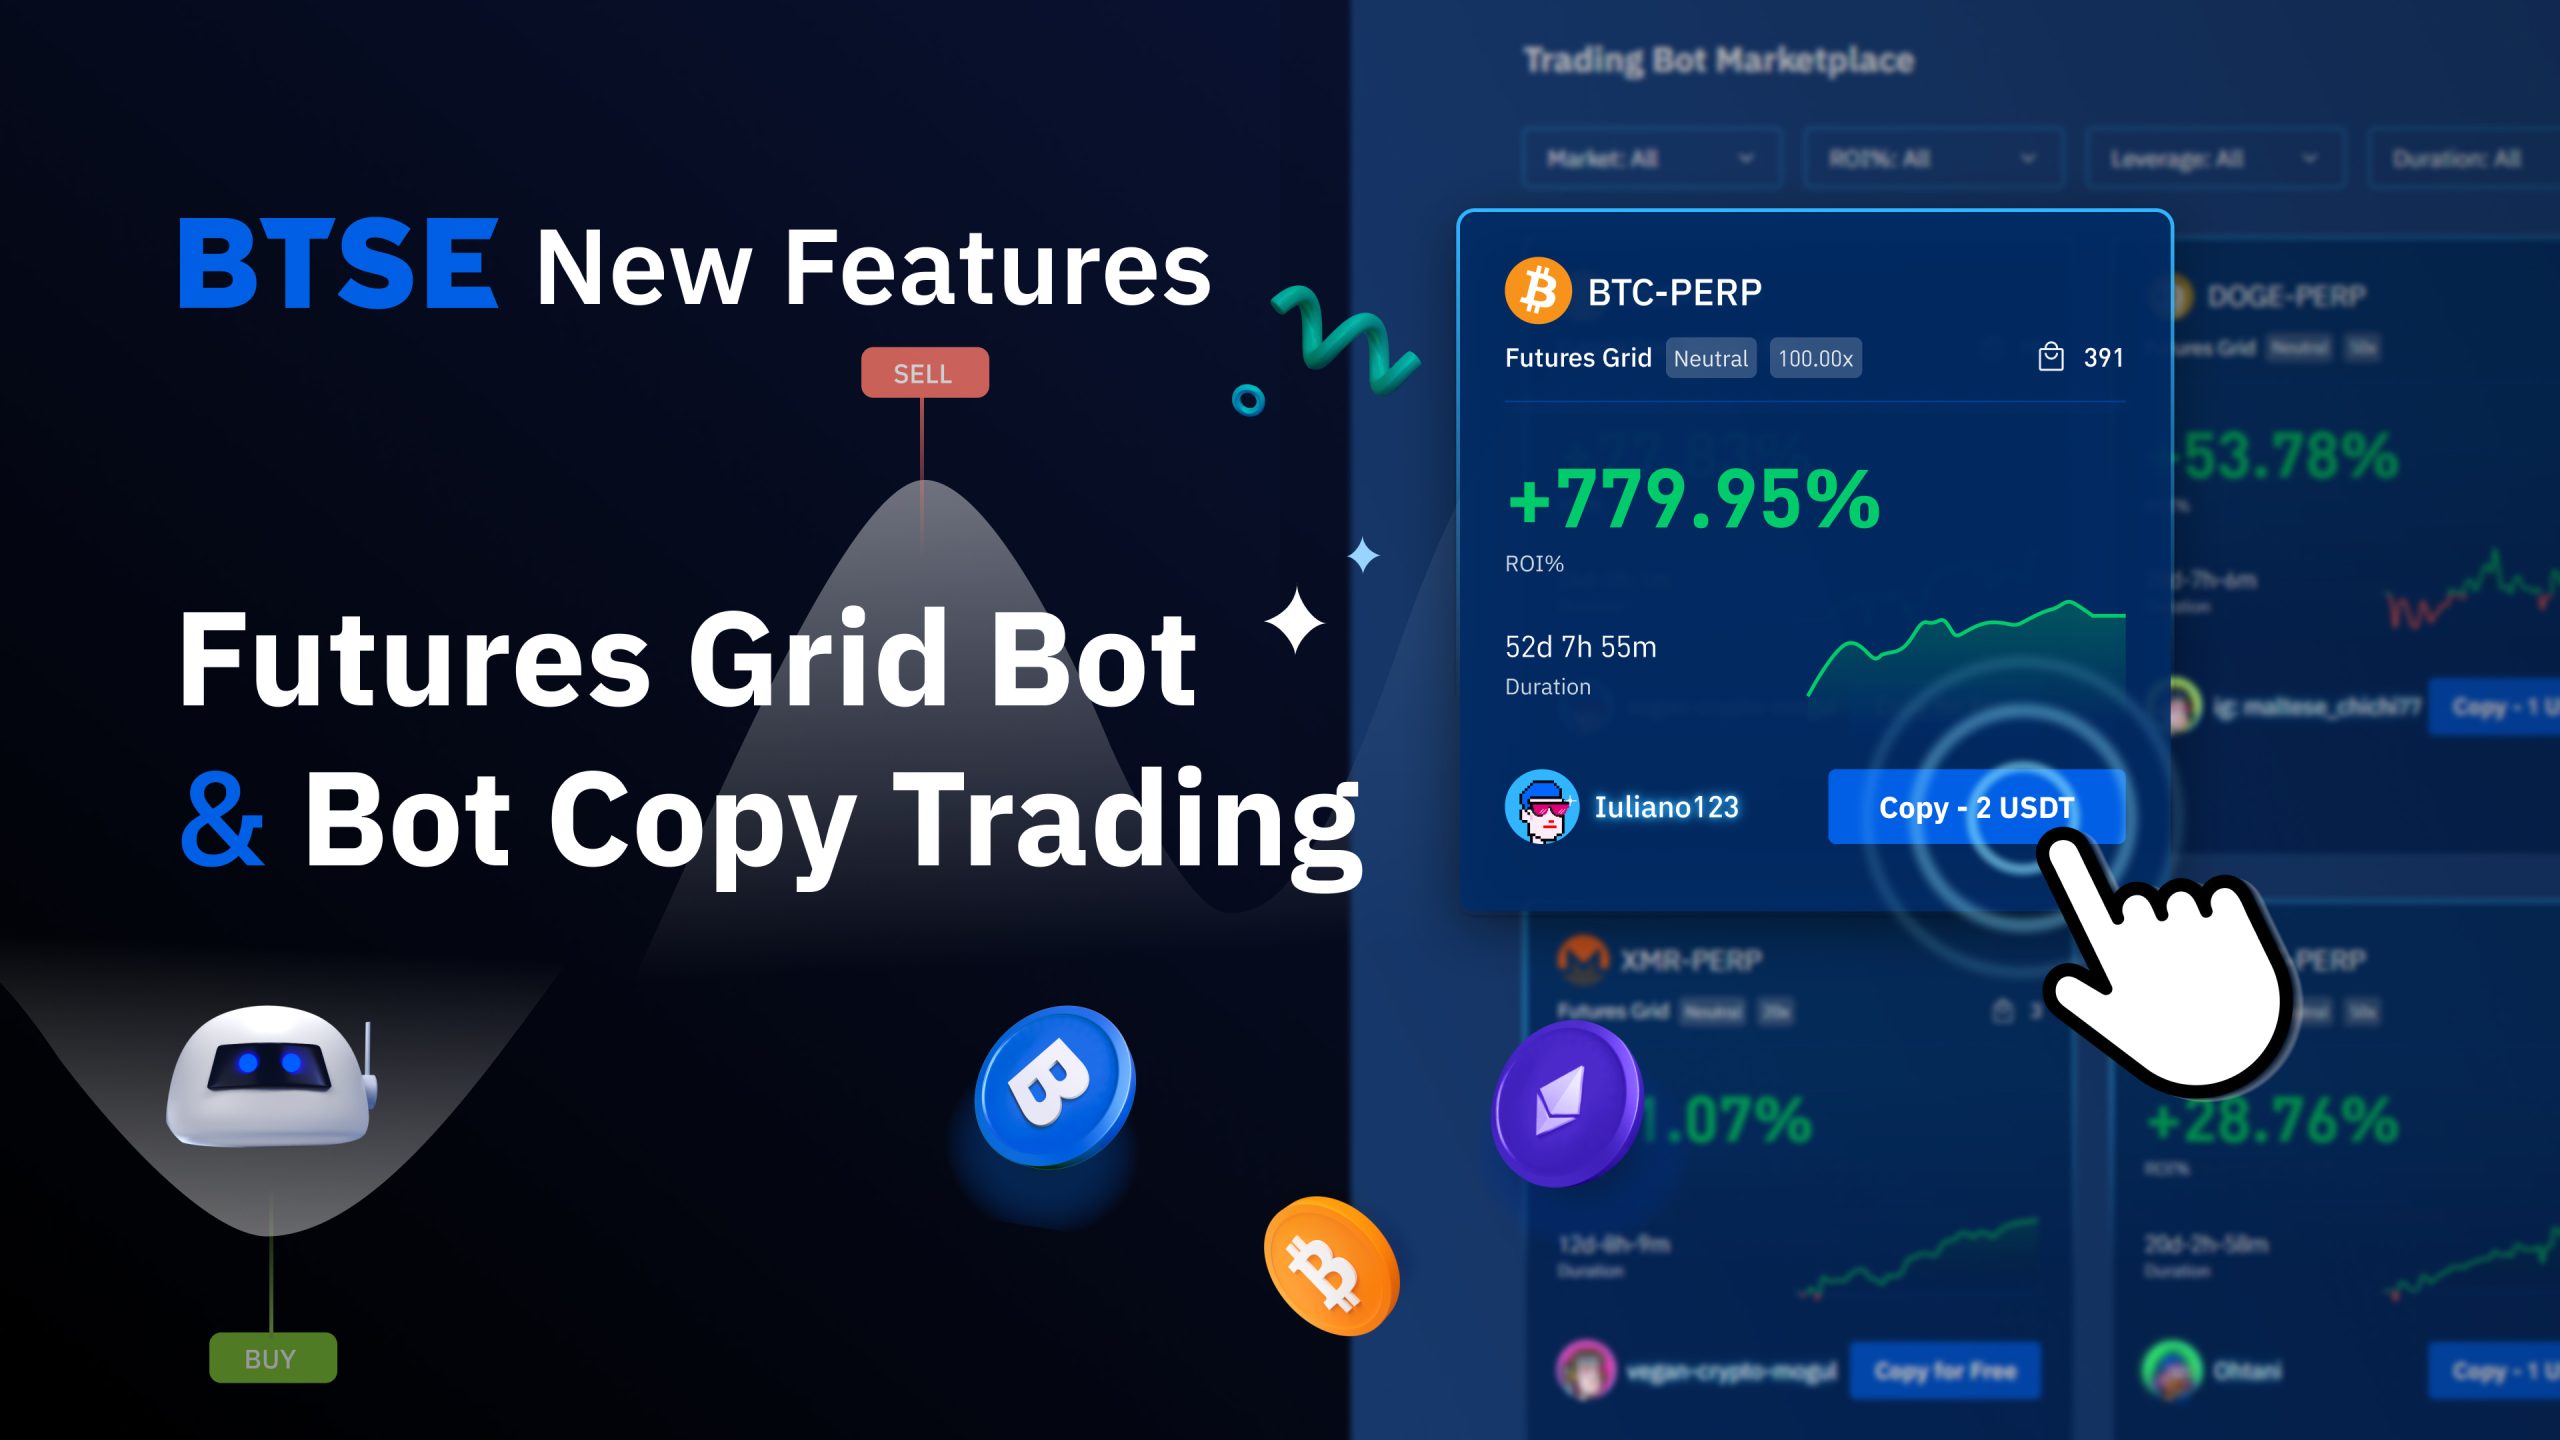 BTSE Launches Futures Grid Trading Bot & Bot Copy Trading Features